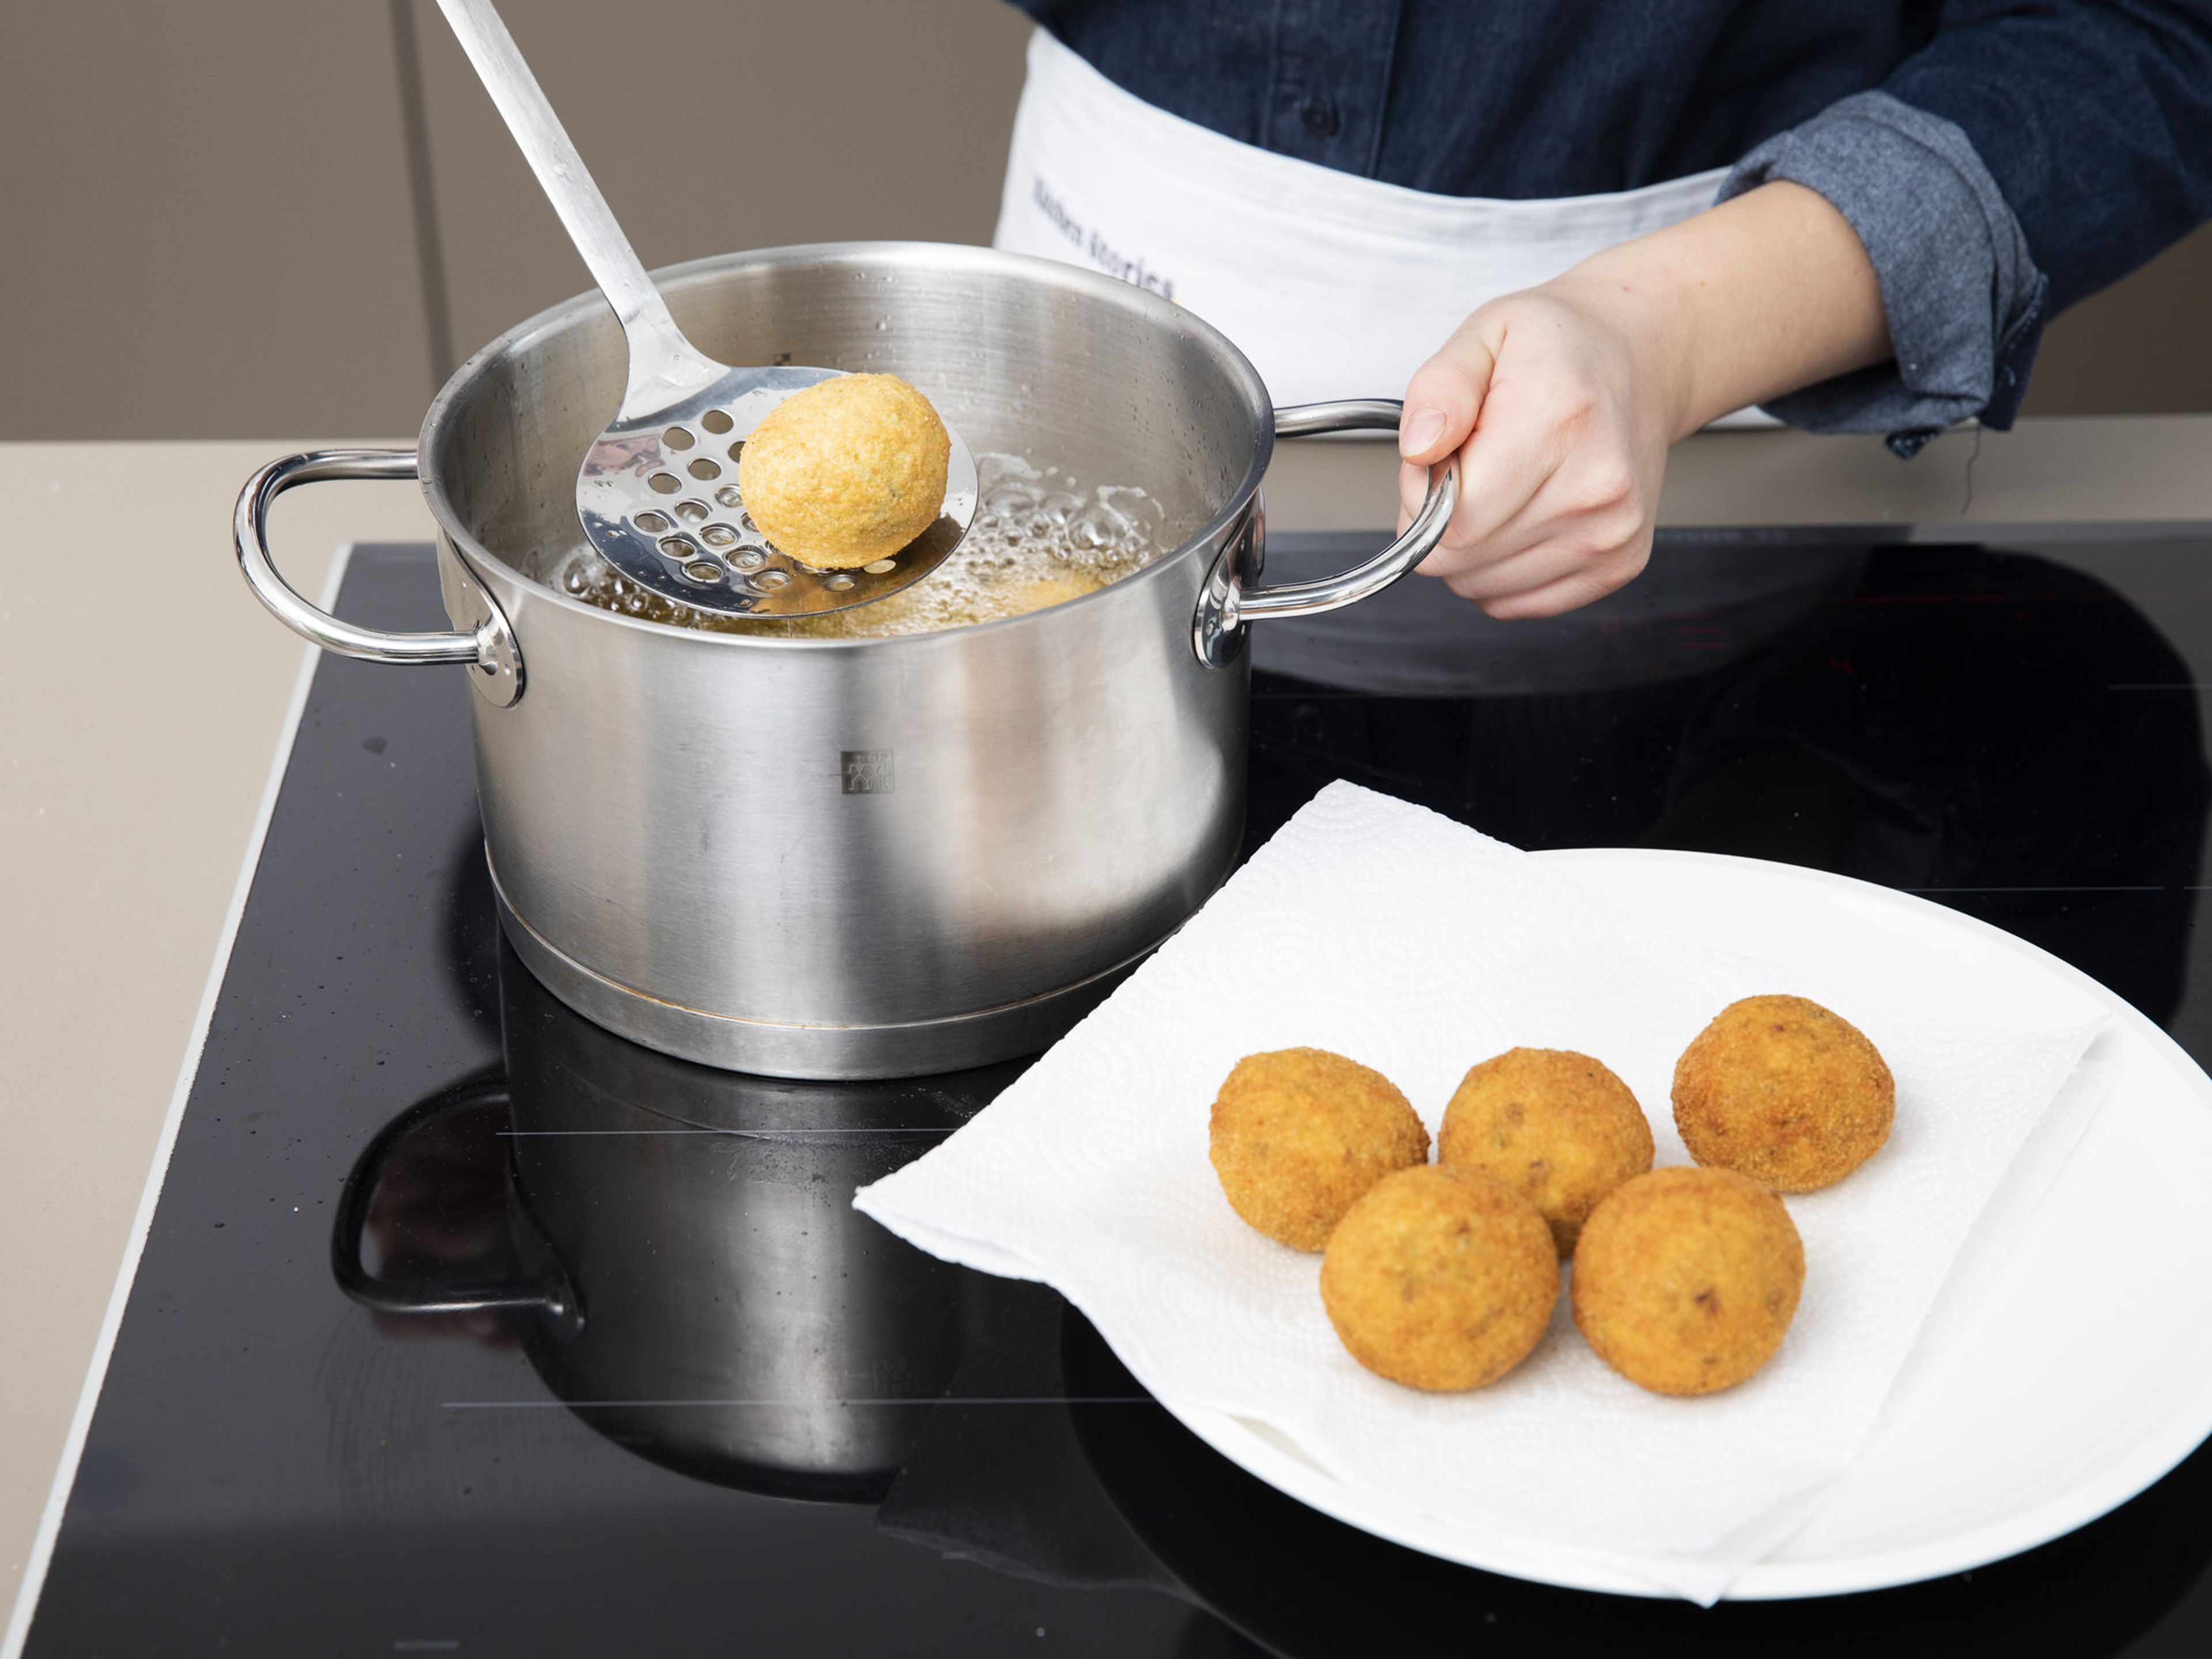 Heat vegetable oil in a small pot until it’s approx. 180°C/350°F. Add arancini in batches and deep-fry them for approx. 6 – 7 min., or until they are crispy and golden brown. Transfer to paper towels to drain and serve warm arancini with lemon wedges and yogurt for dipping. Enjoy!